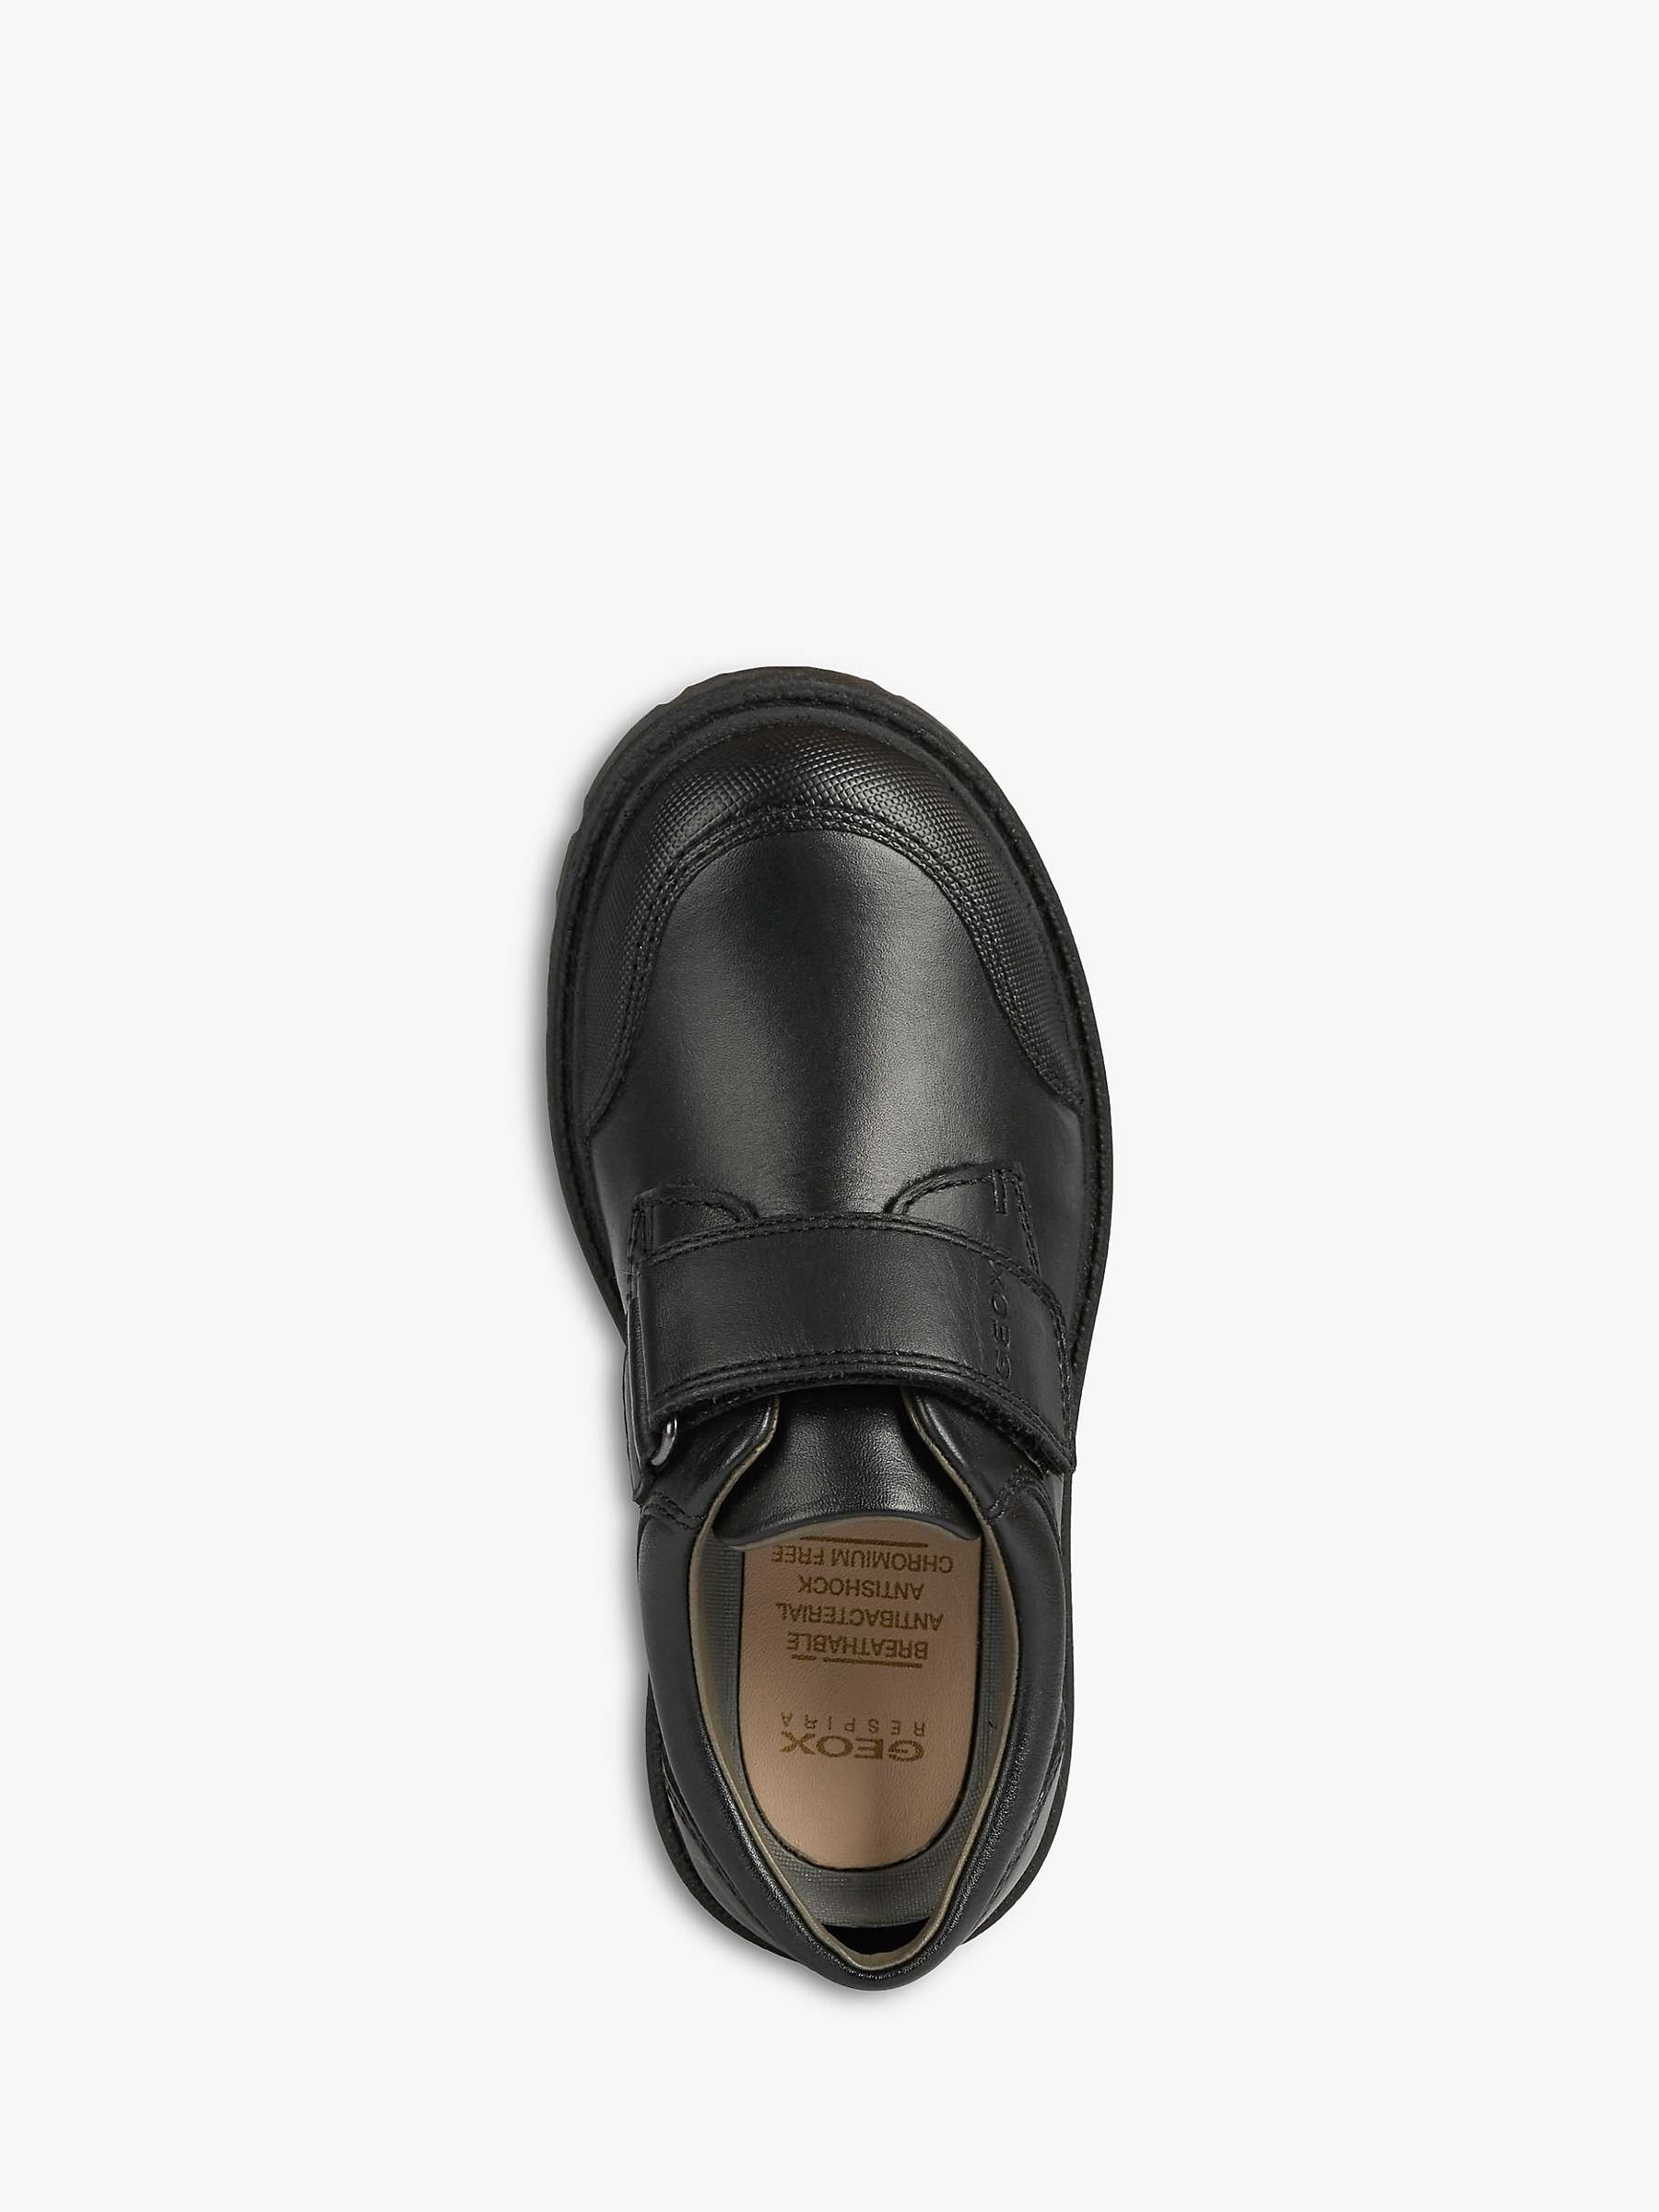 Buy Geox Kids' Shaylax Leather School Shoes, Black Online at johnlewis.com